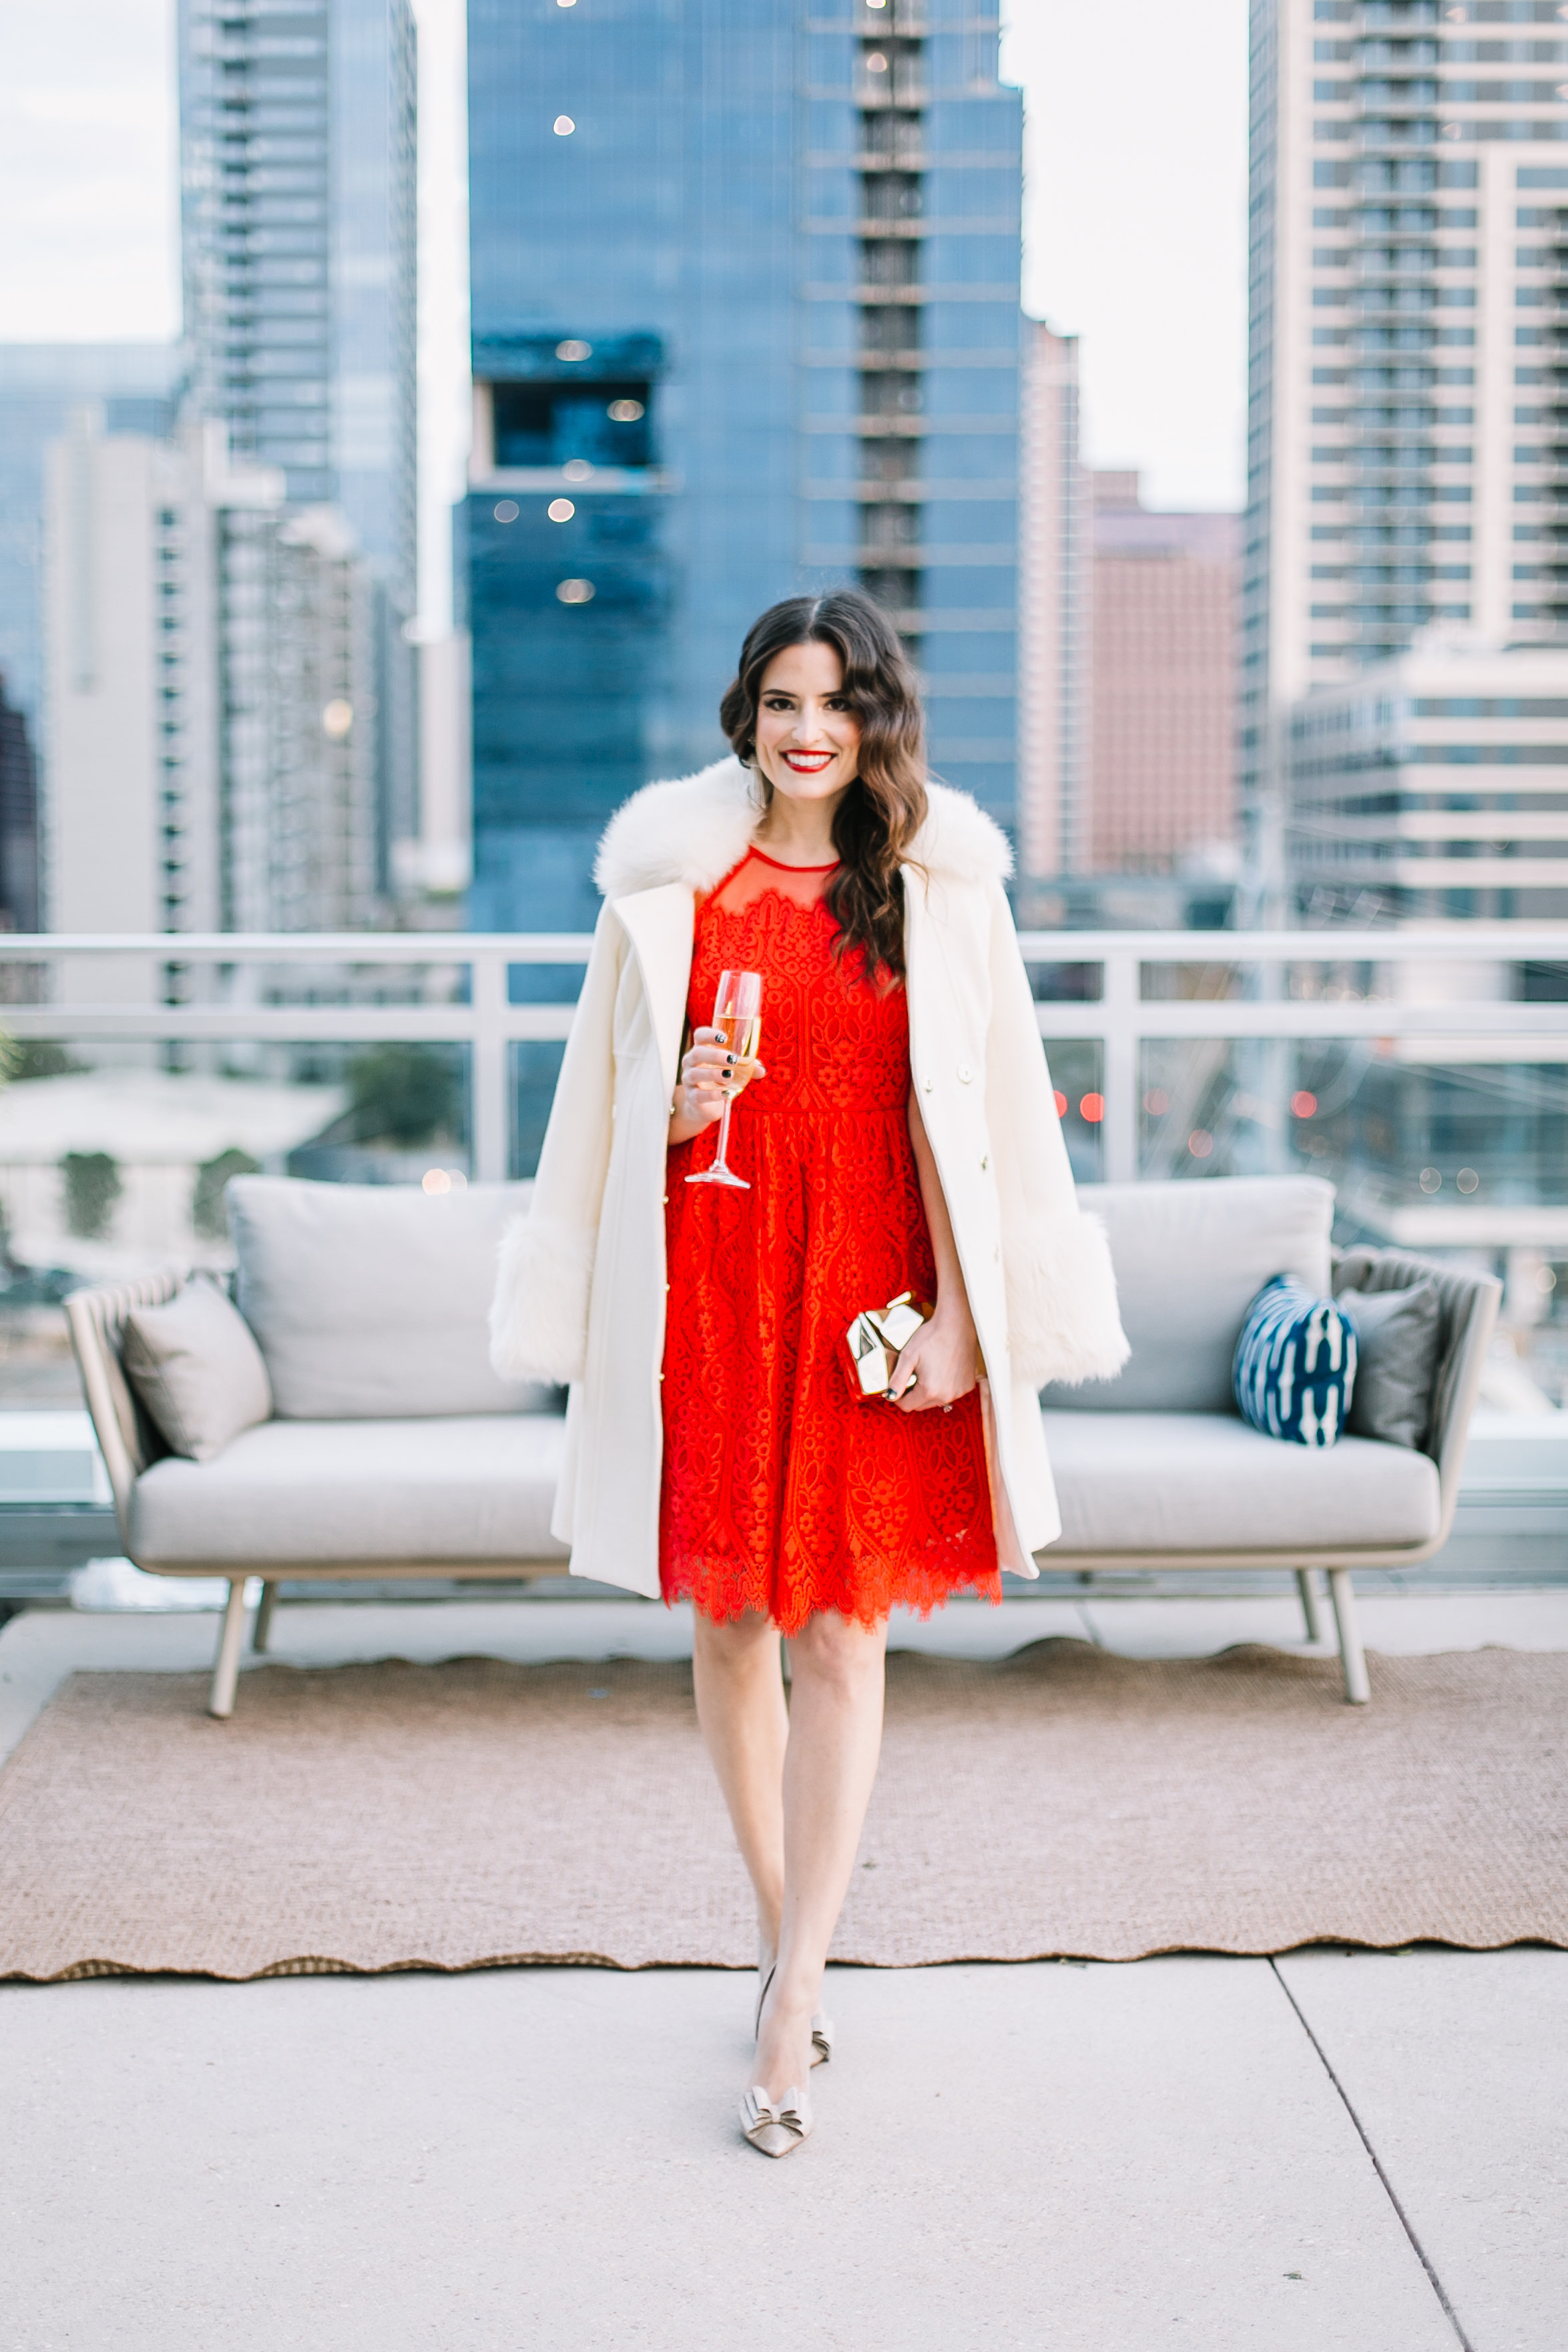 style-beacon-red-lace-dress-white-fur-jacket-sparkly-heels